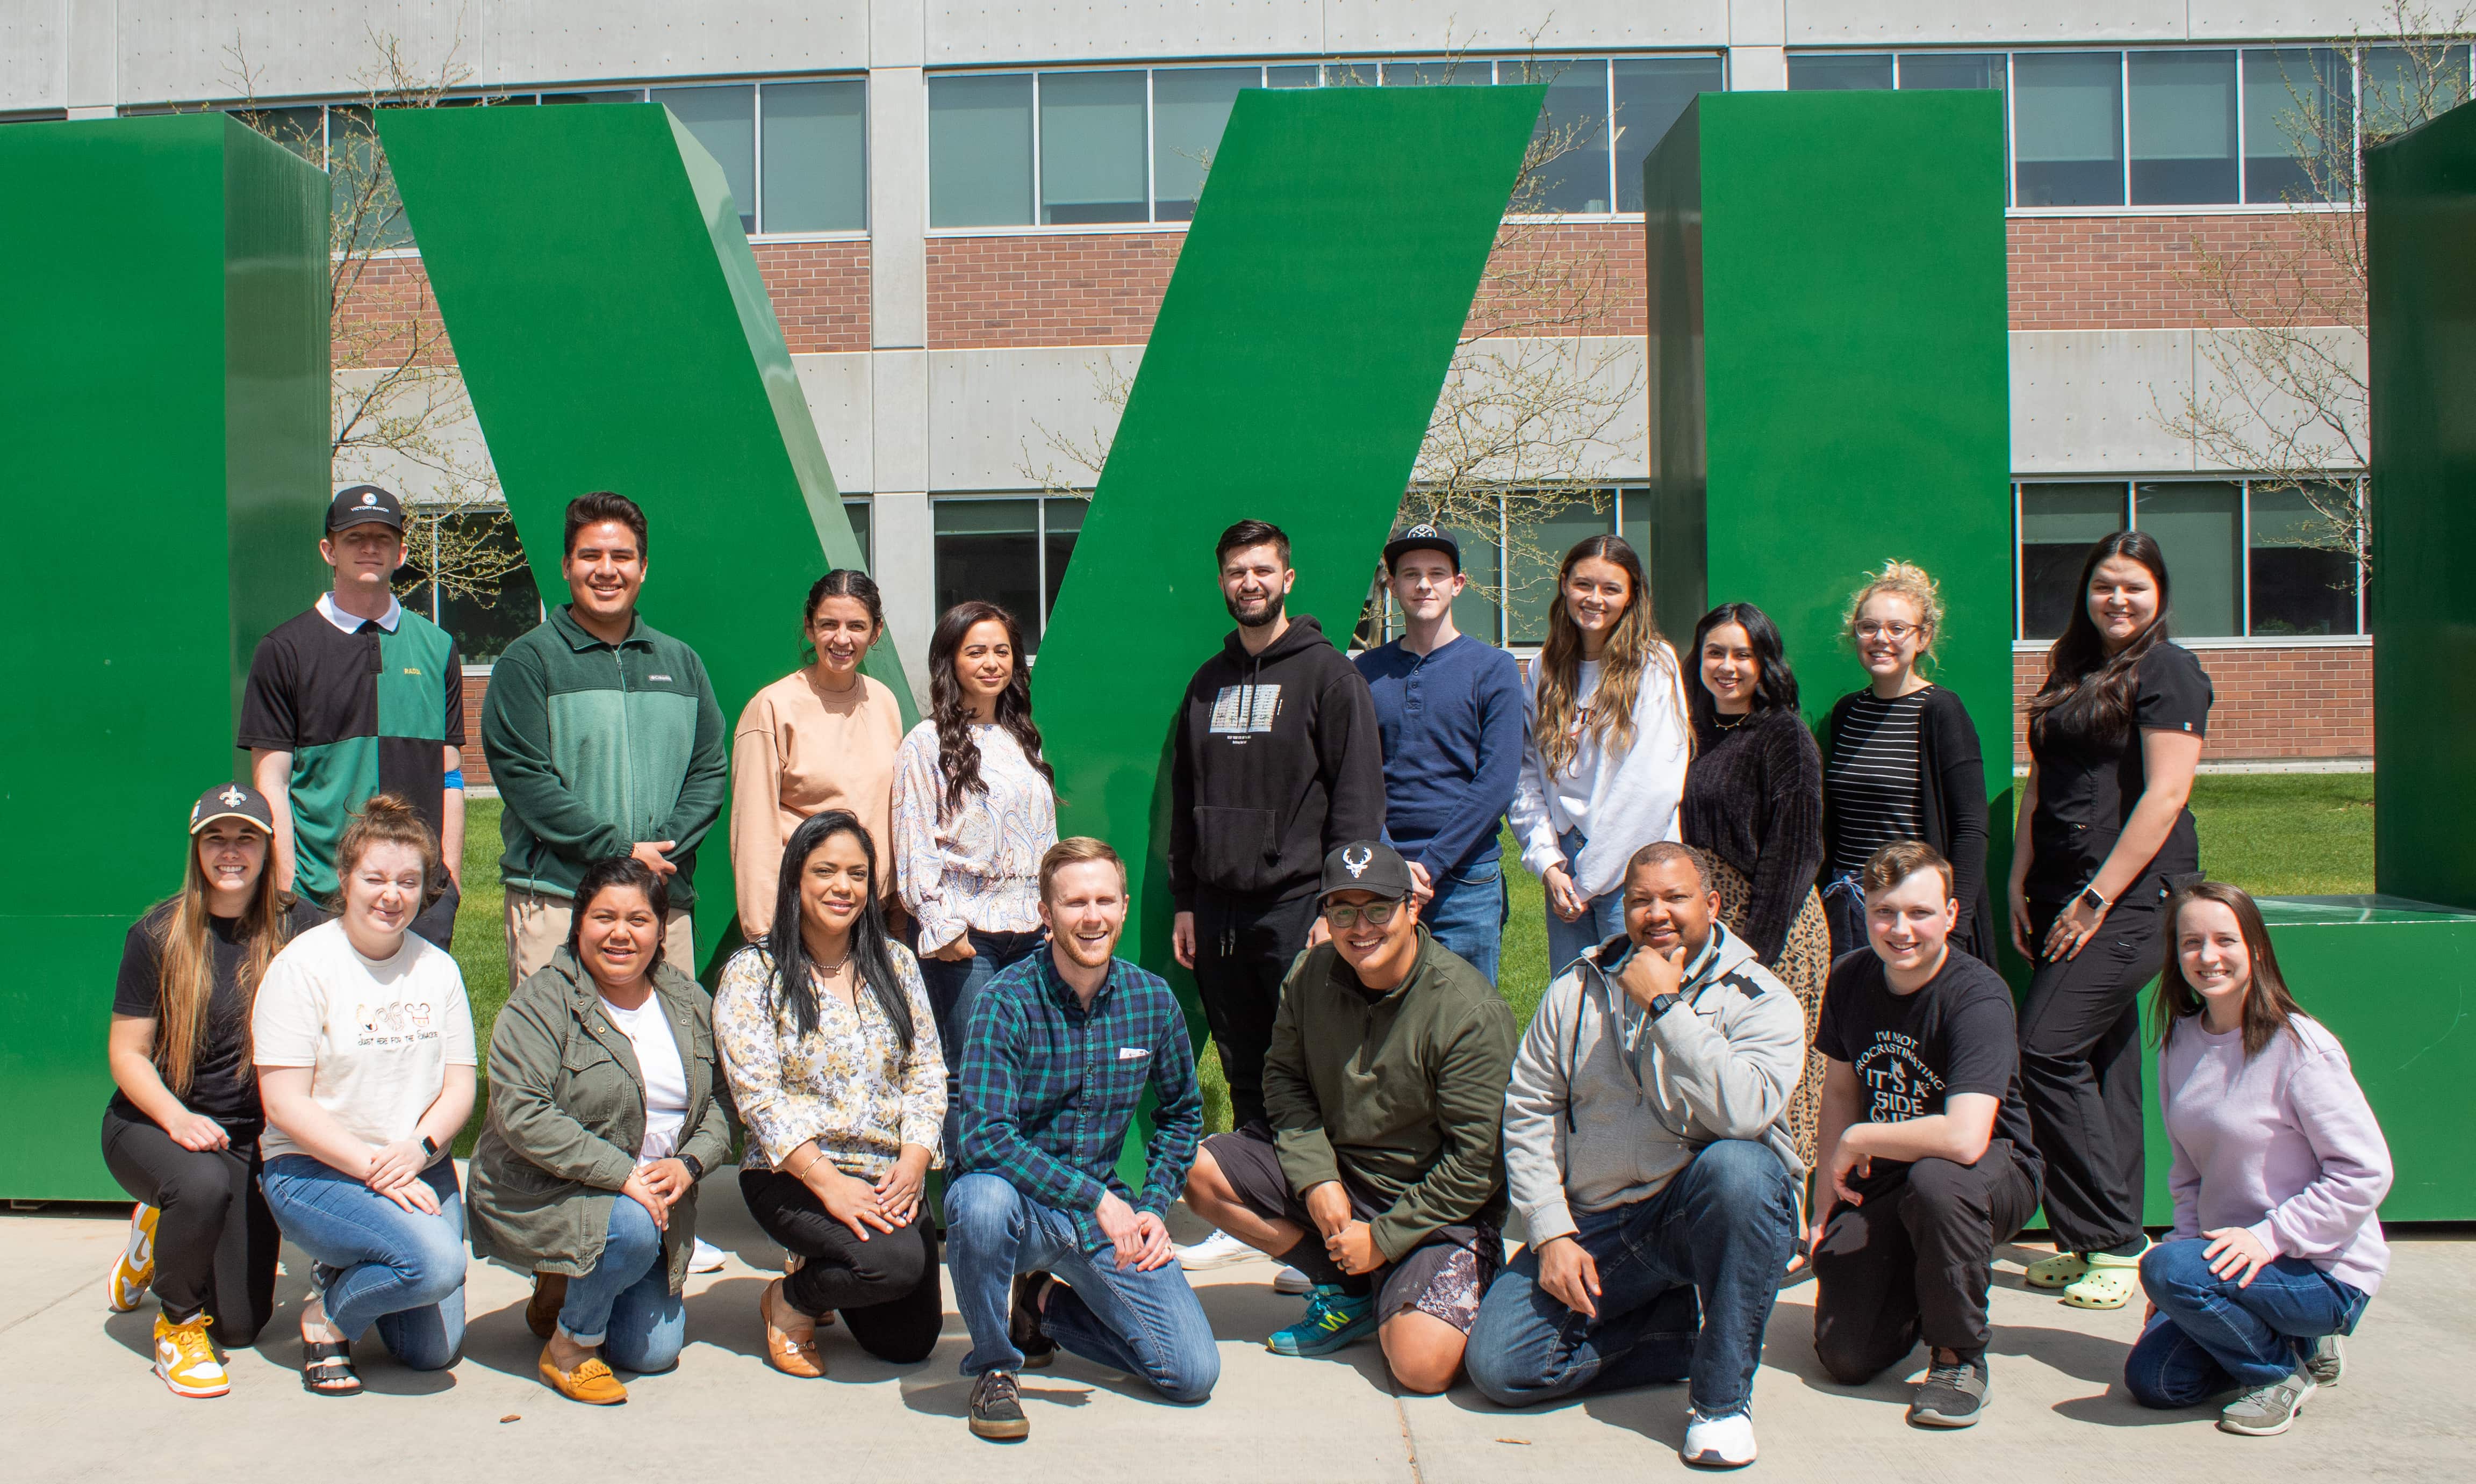 Two rows of students and one professor posing for a picture on a sunny day in front of the giant green UVU letters on the Orem campus